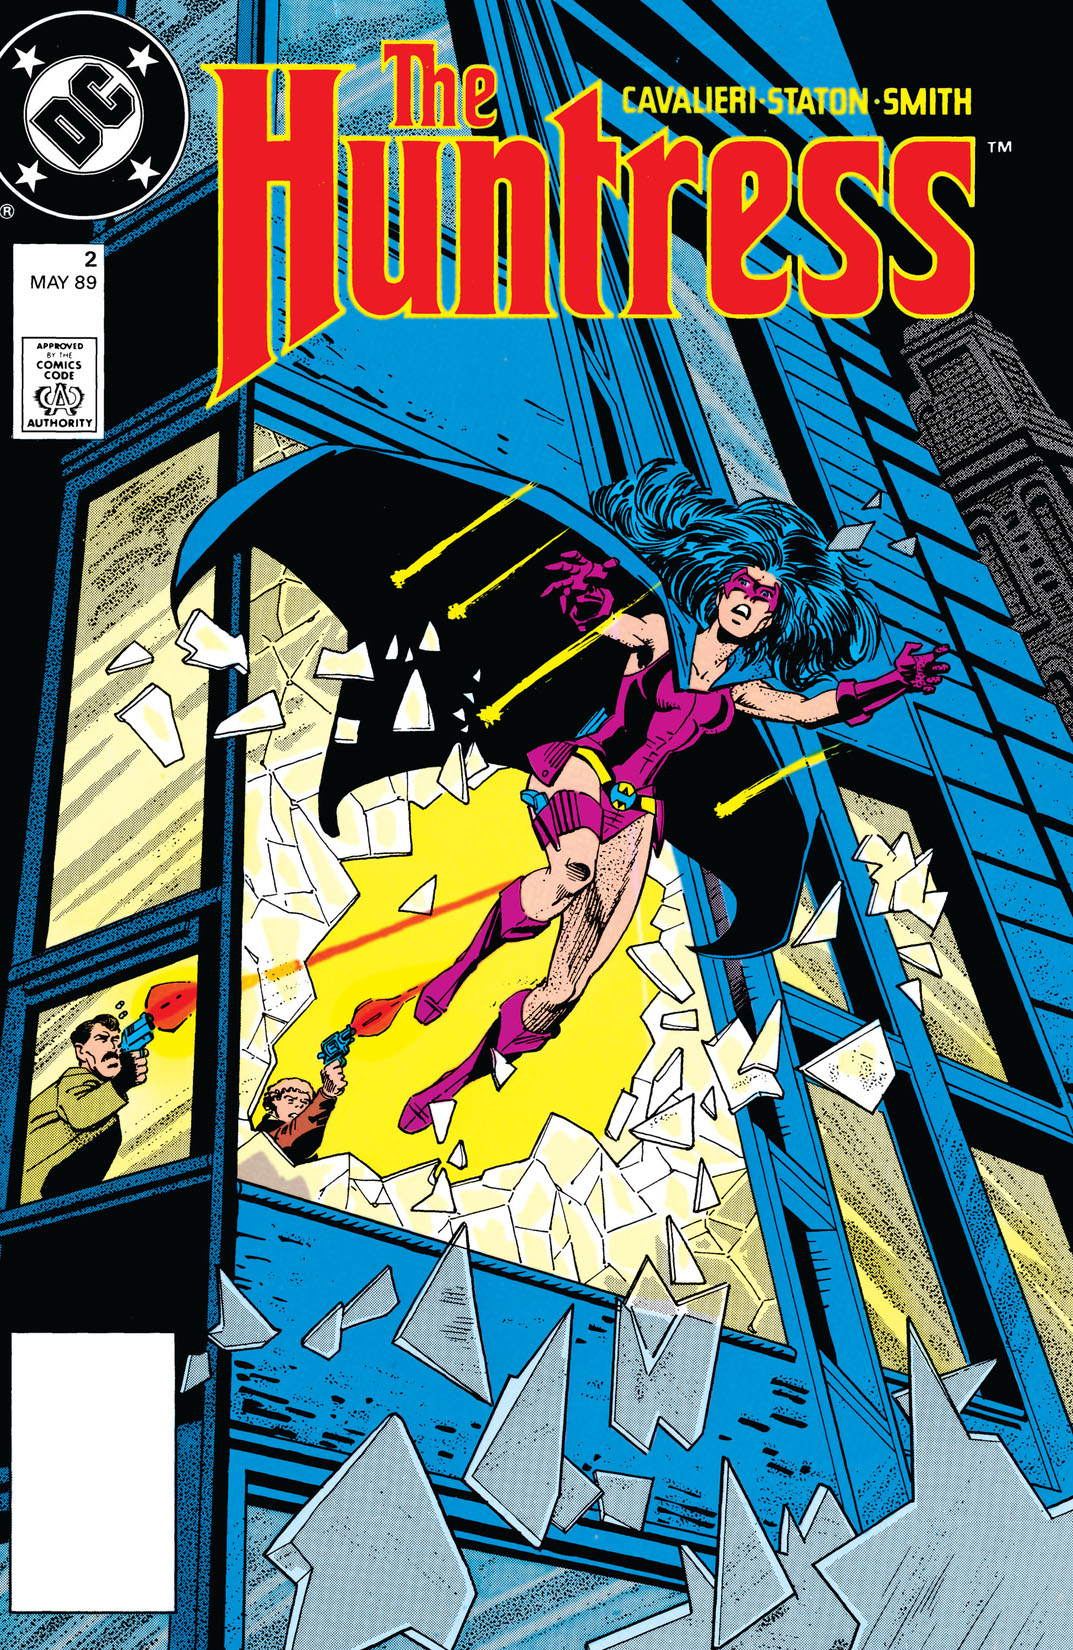 The Huntress (1989-) #2 preview images